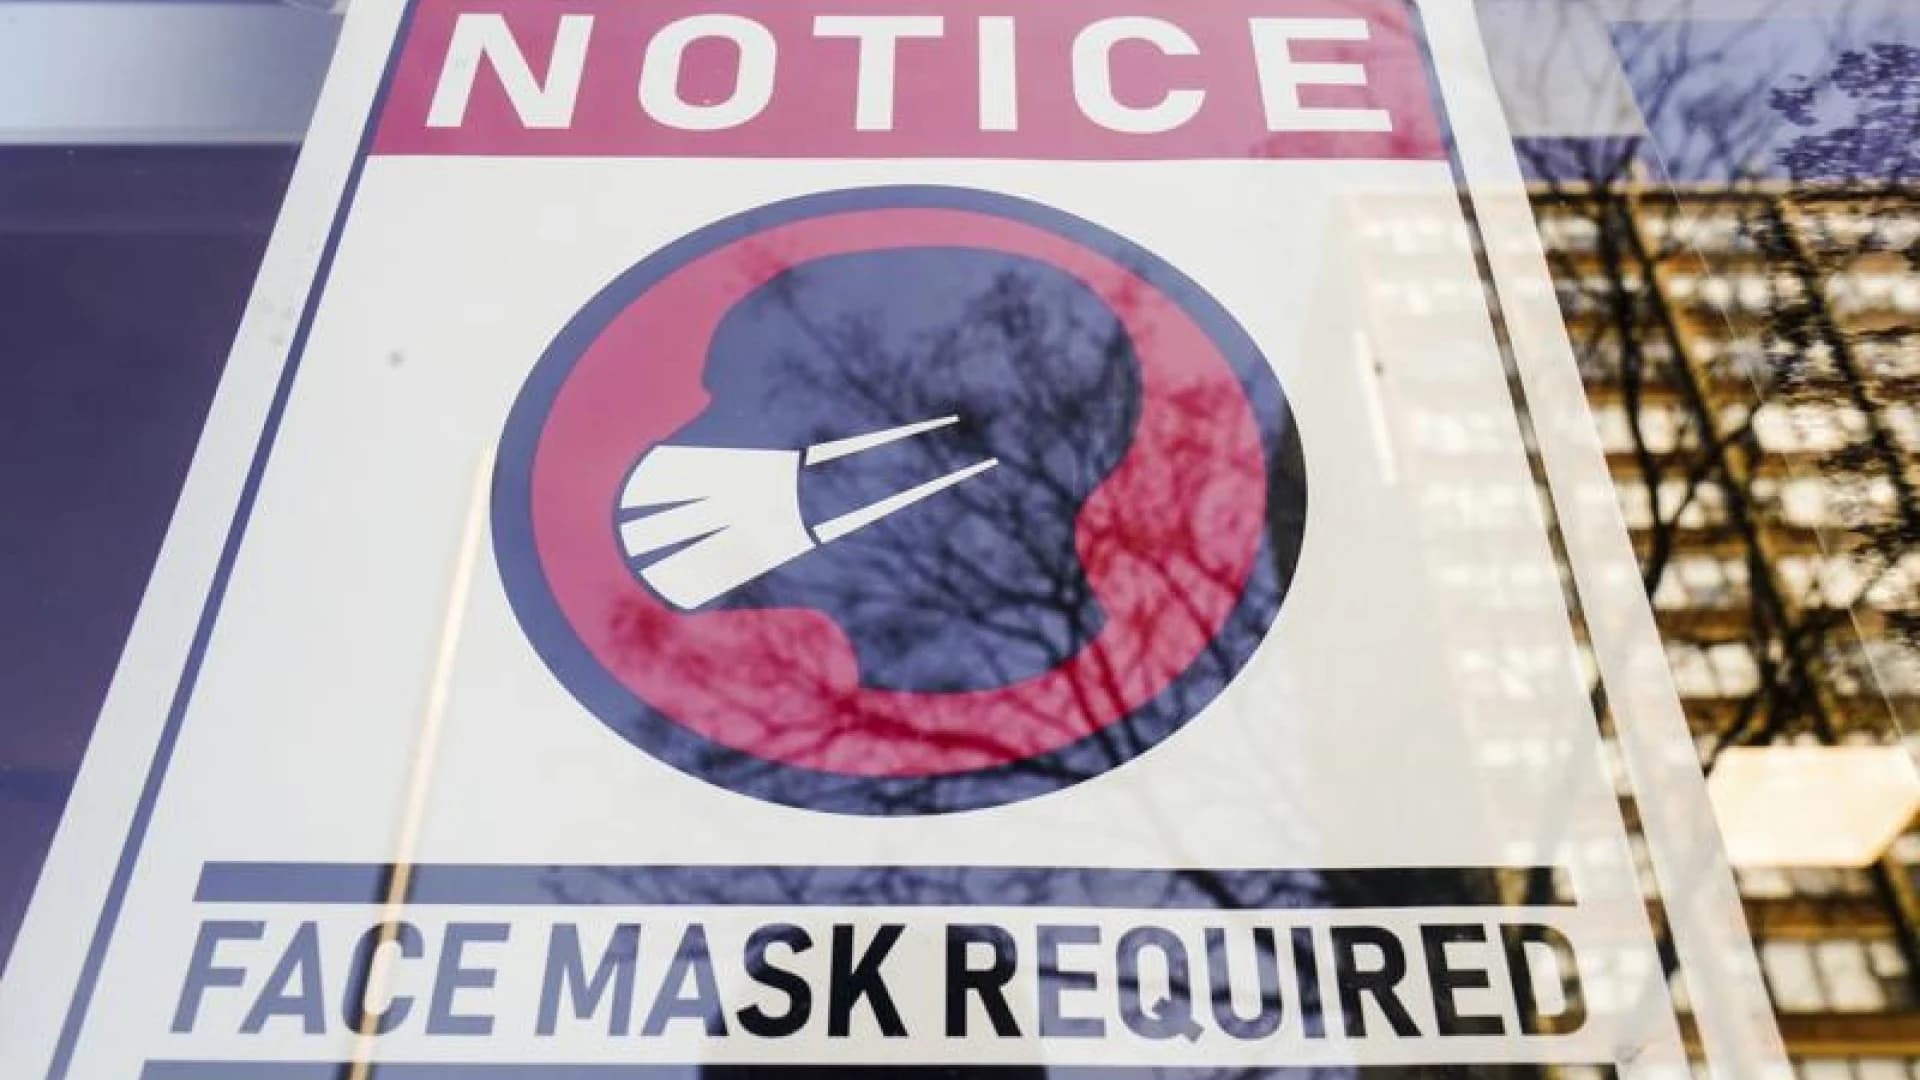 CDC to significantly ease pandemic mask guidelines Friday